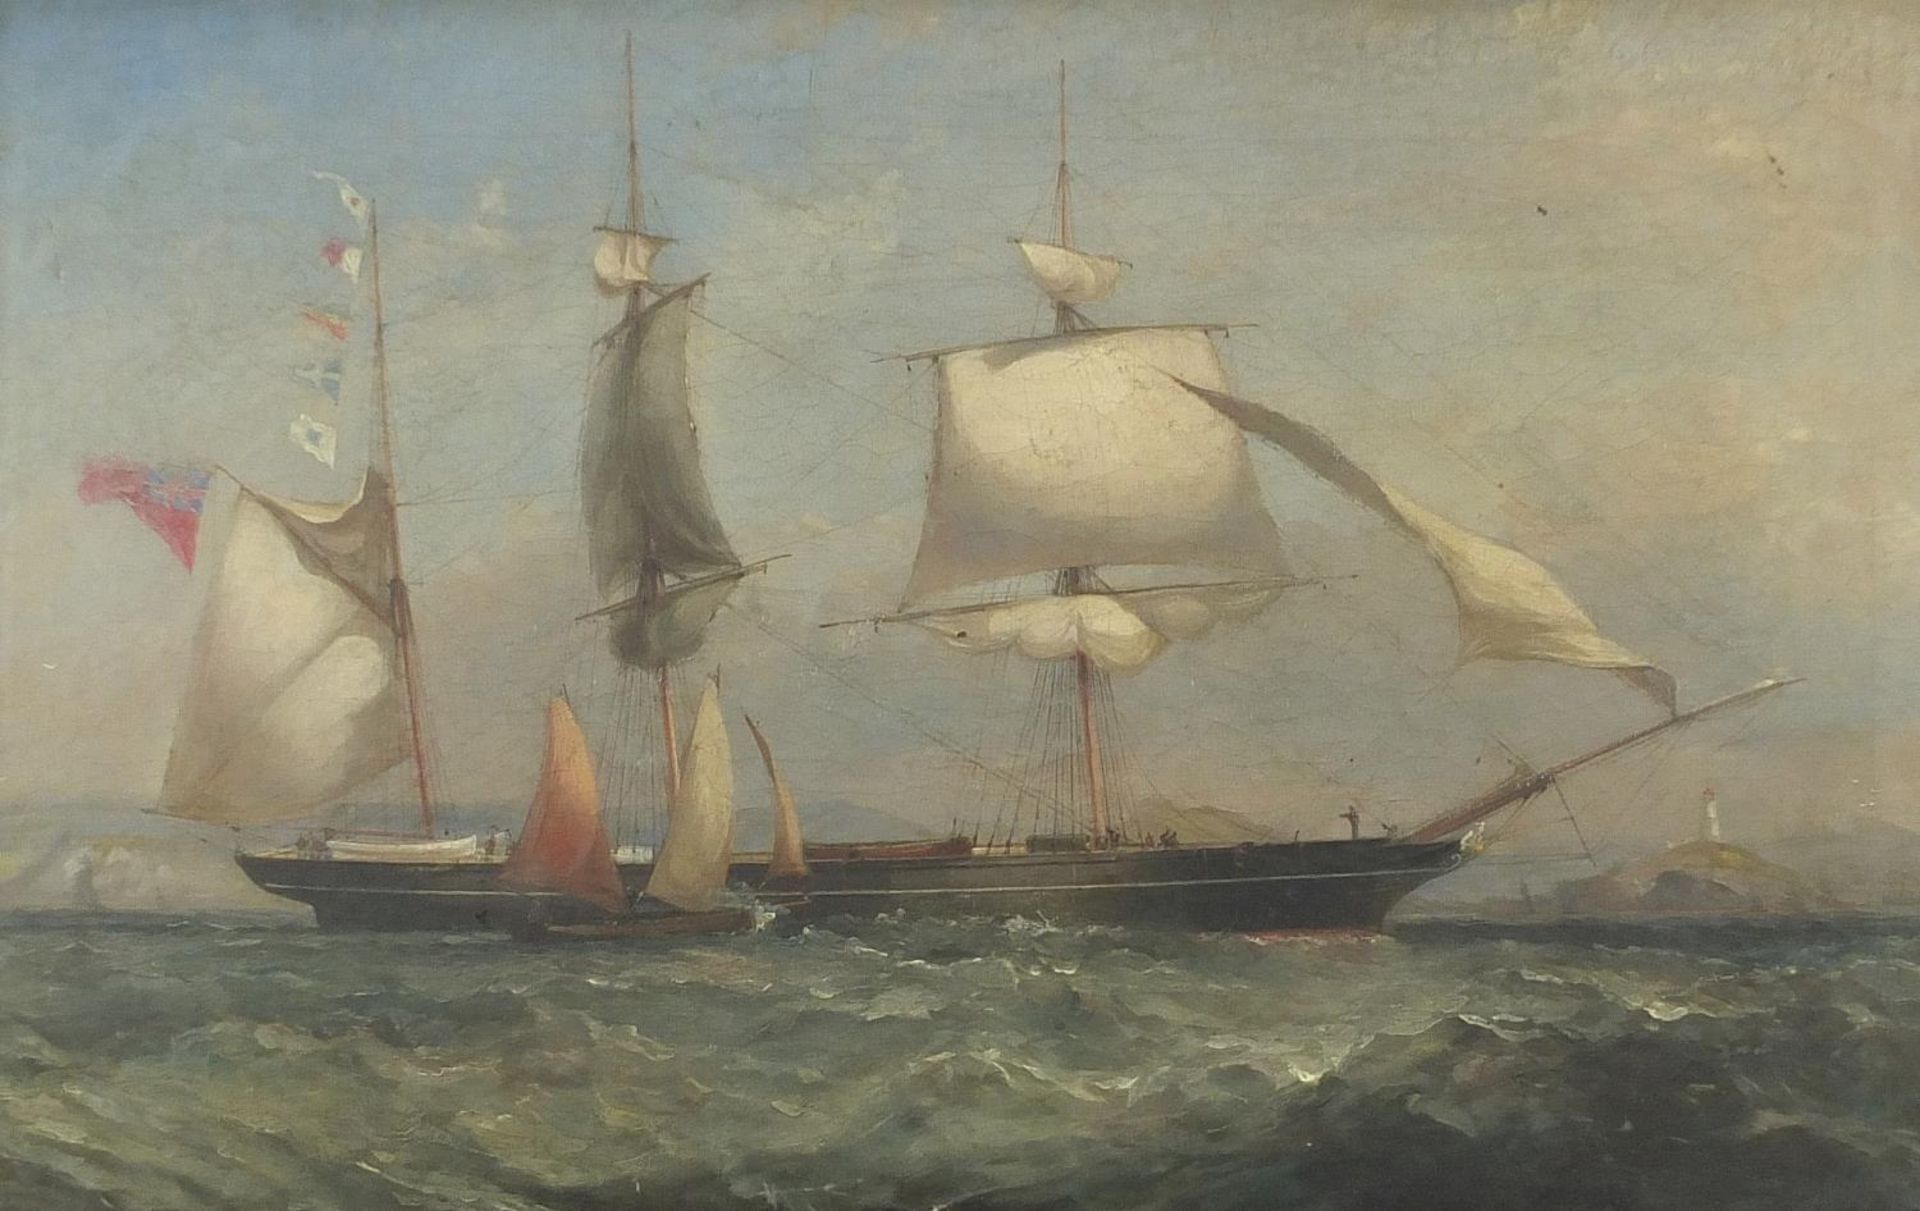 Frigate and sailing boat at sea, 18th/19th century maritime oil on canvas, framed and glazed, 53cm x